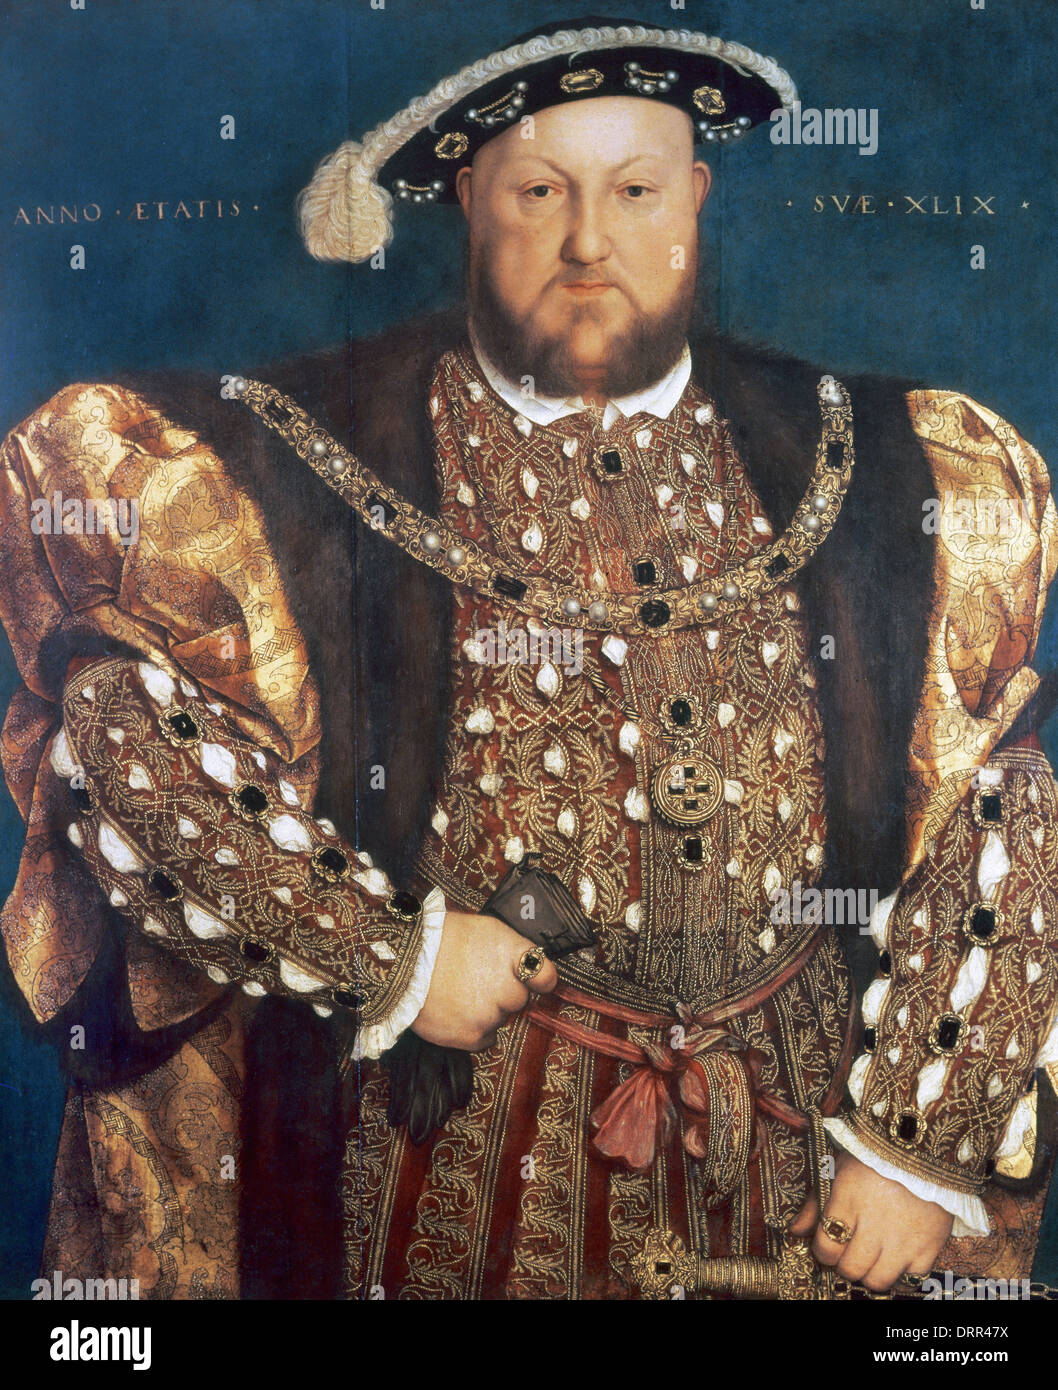 Henry VIII (1491-1547). King of England from 1509-1547. Portrait by Hans Holbein the Younger (1497-1543). Oil on panel, 1540. Stock Photo